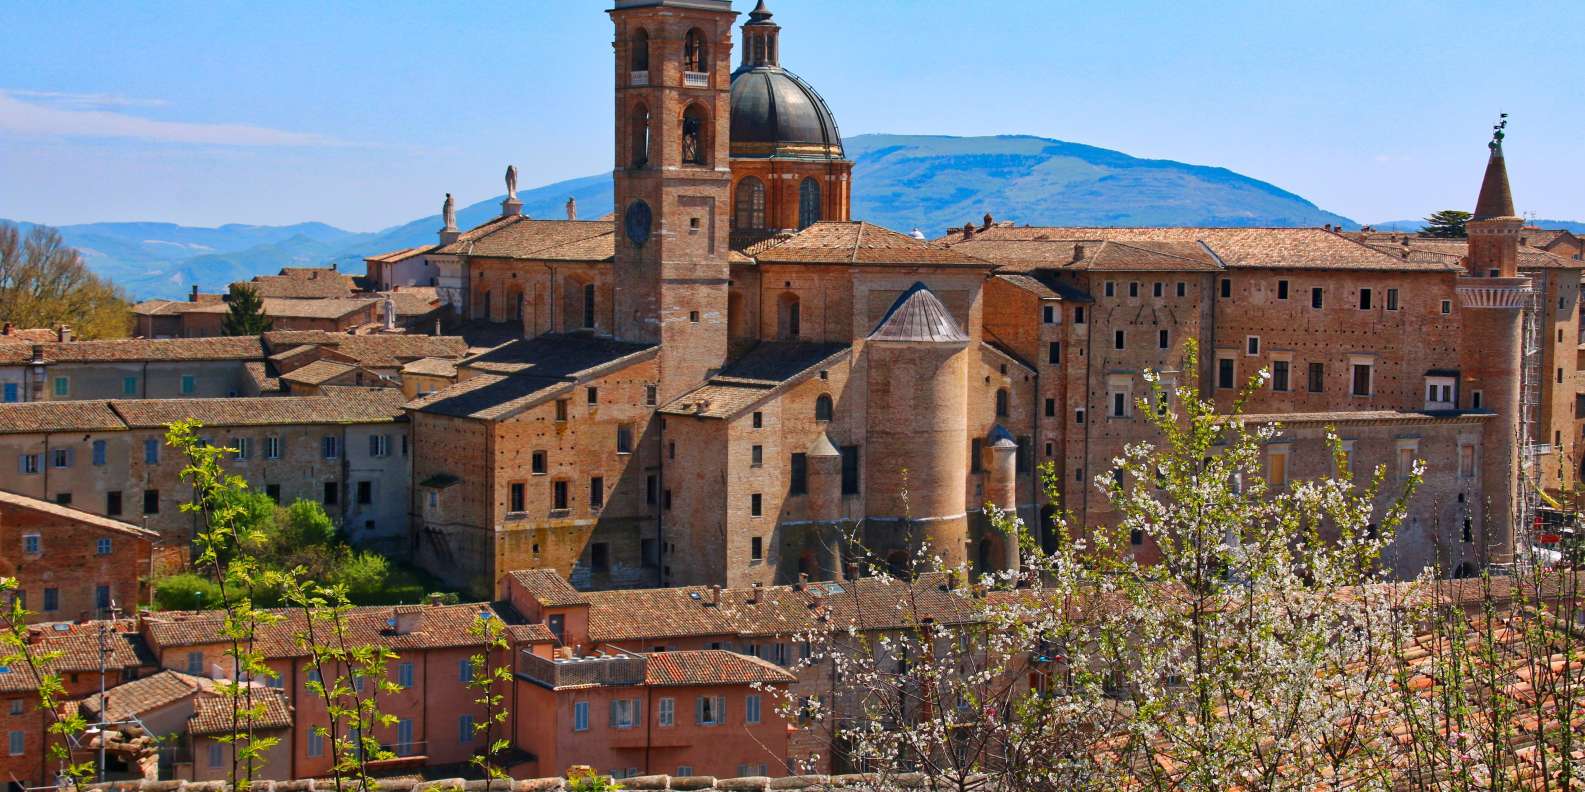 What to do in Urbino